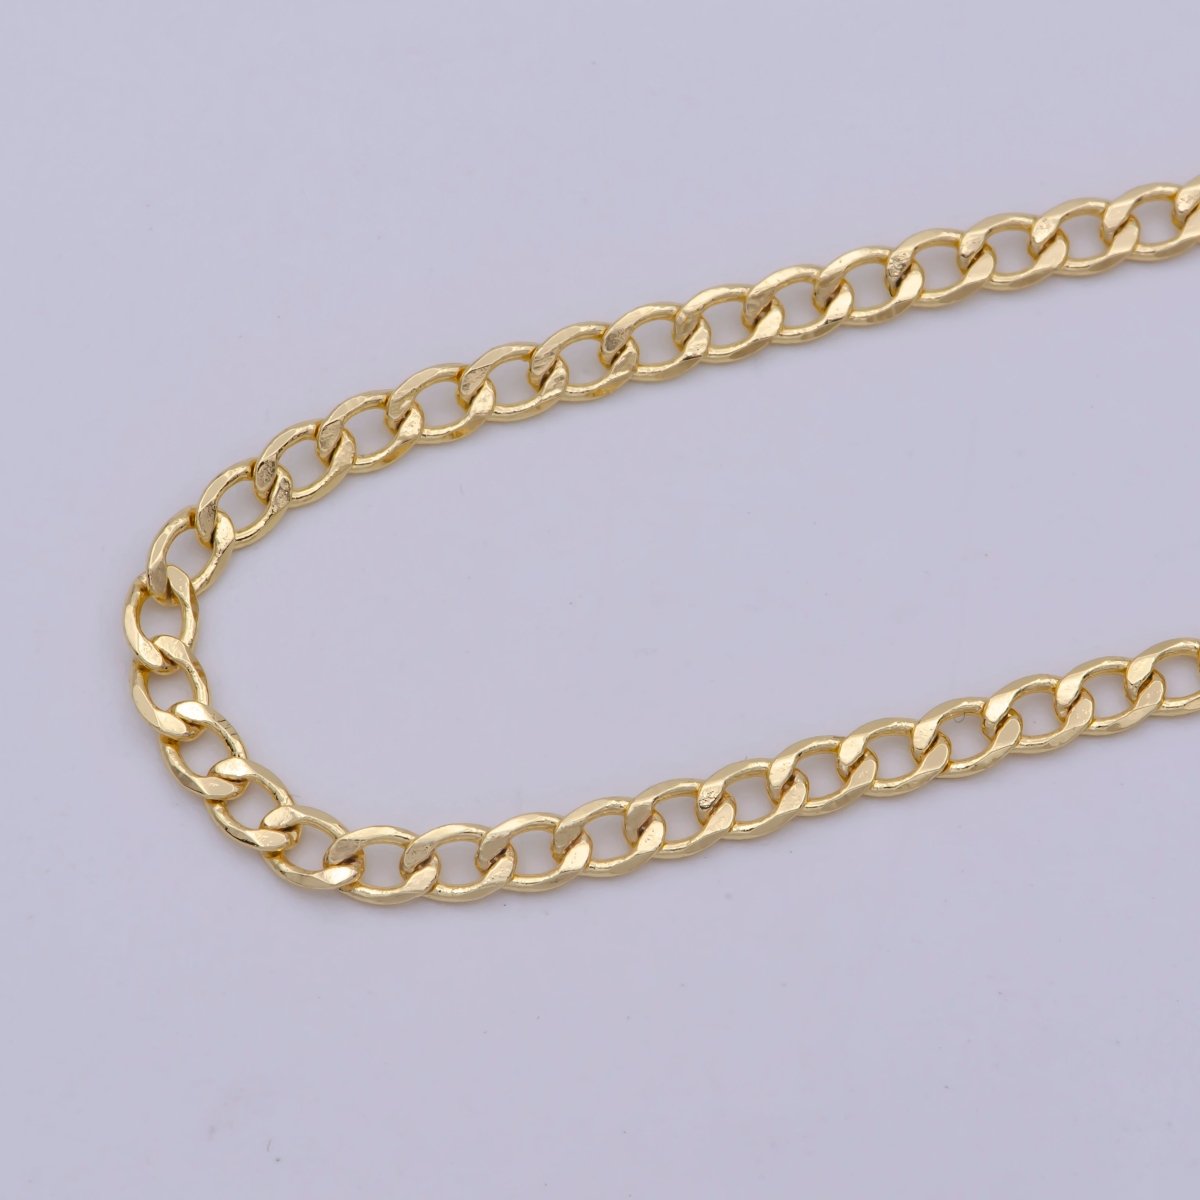 16K Gold Filled CURB Chain, Flat Cuban Curb Chain Sold by Yard, 0.5mm Thickness Unfinished Wholesale Bulk Chain | ROLL-564 / ROLL-393 / ROLL-283 Clearance Pricing - DLUXCA